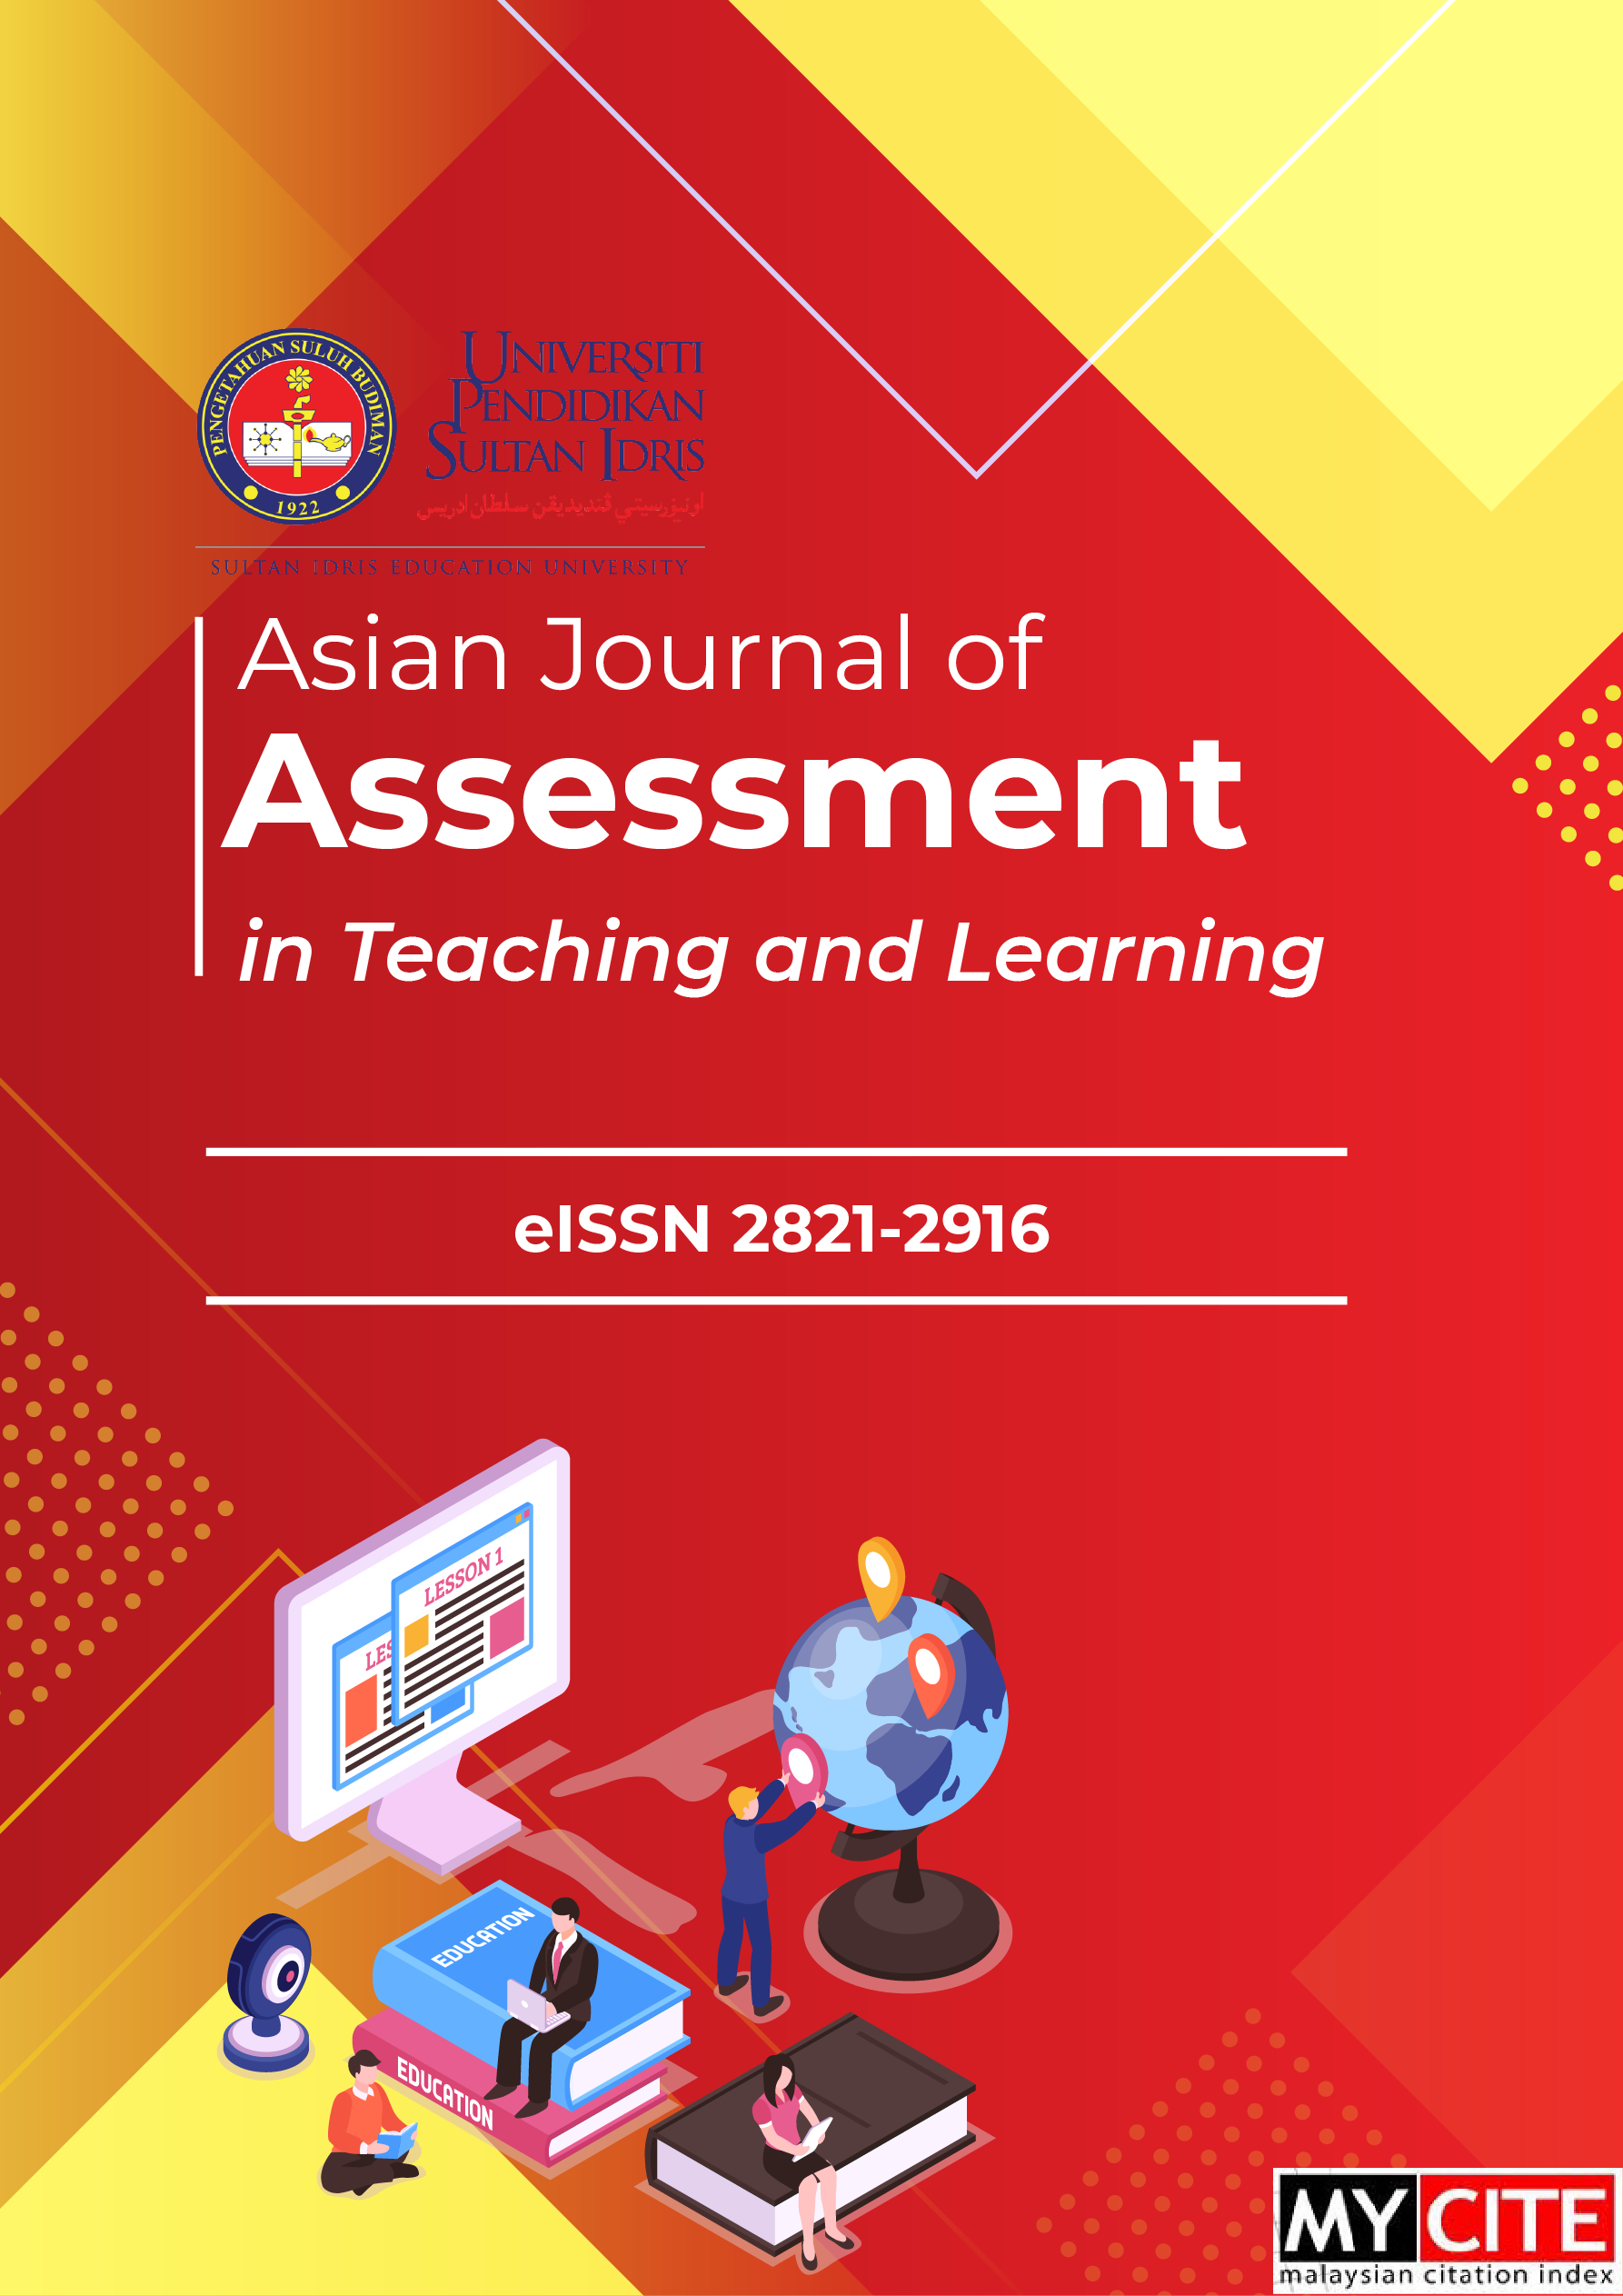 					View Vol. 10 No. 1 (2020): Asian Journal of Assessment in Teaching and Learning
				